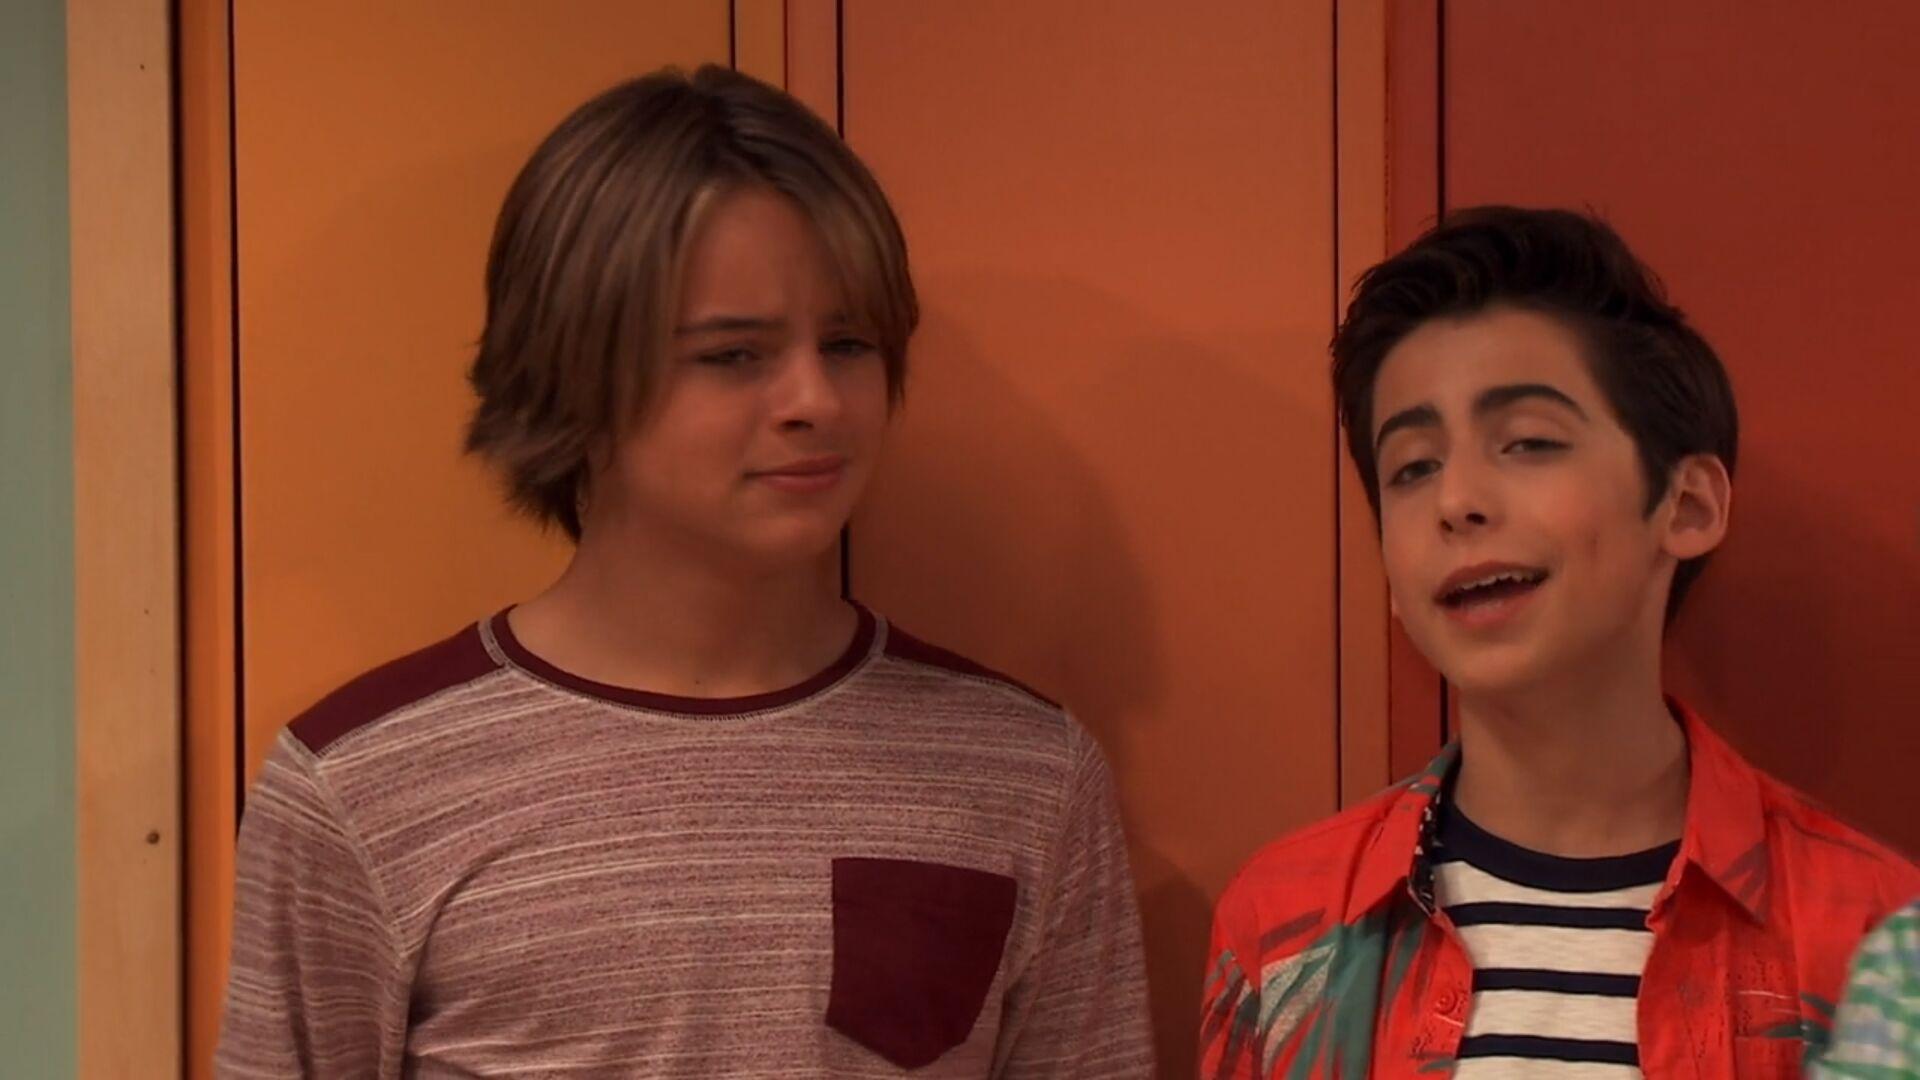 Picture of Aidan Gallagher in Nicky, Ricky, Dicky & Dawn (Season 4). Teen Idols 4 You